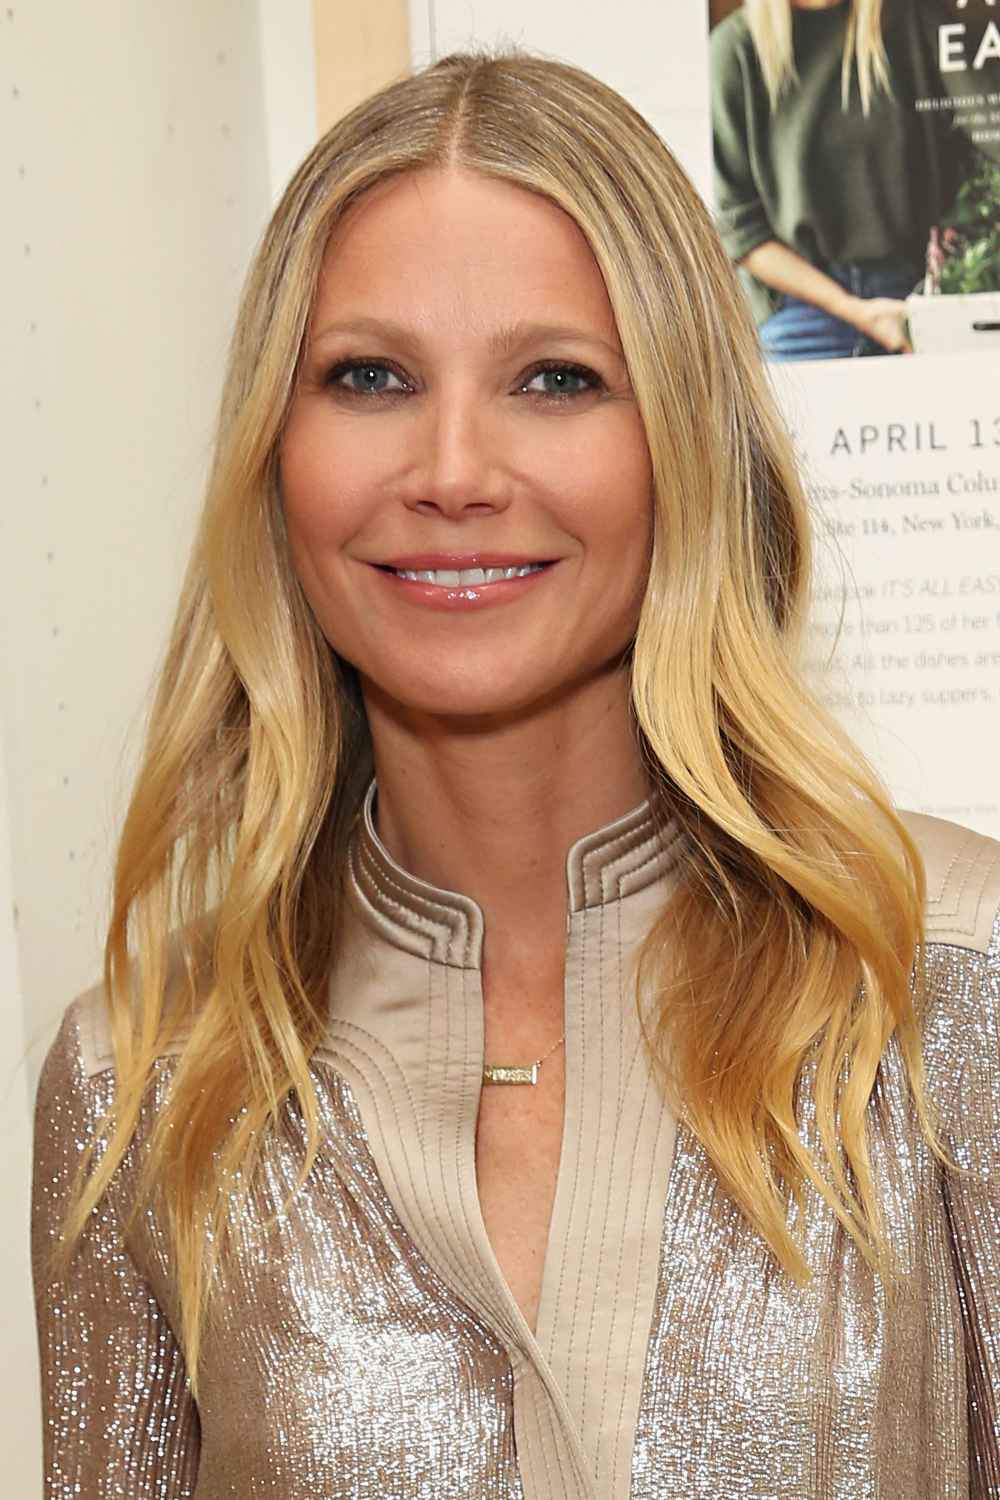 Gwyneth Paltrow looking glamorous to sign copies of her book 'It's All Easy' at Williams-Sonoma on April 13, 2016 in New York City